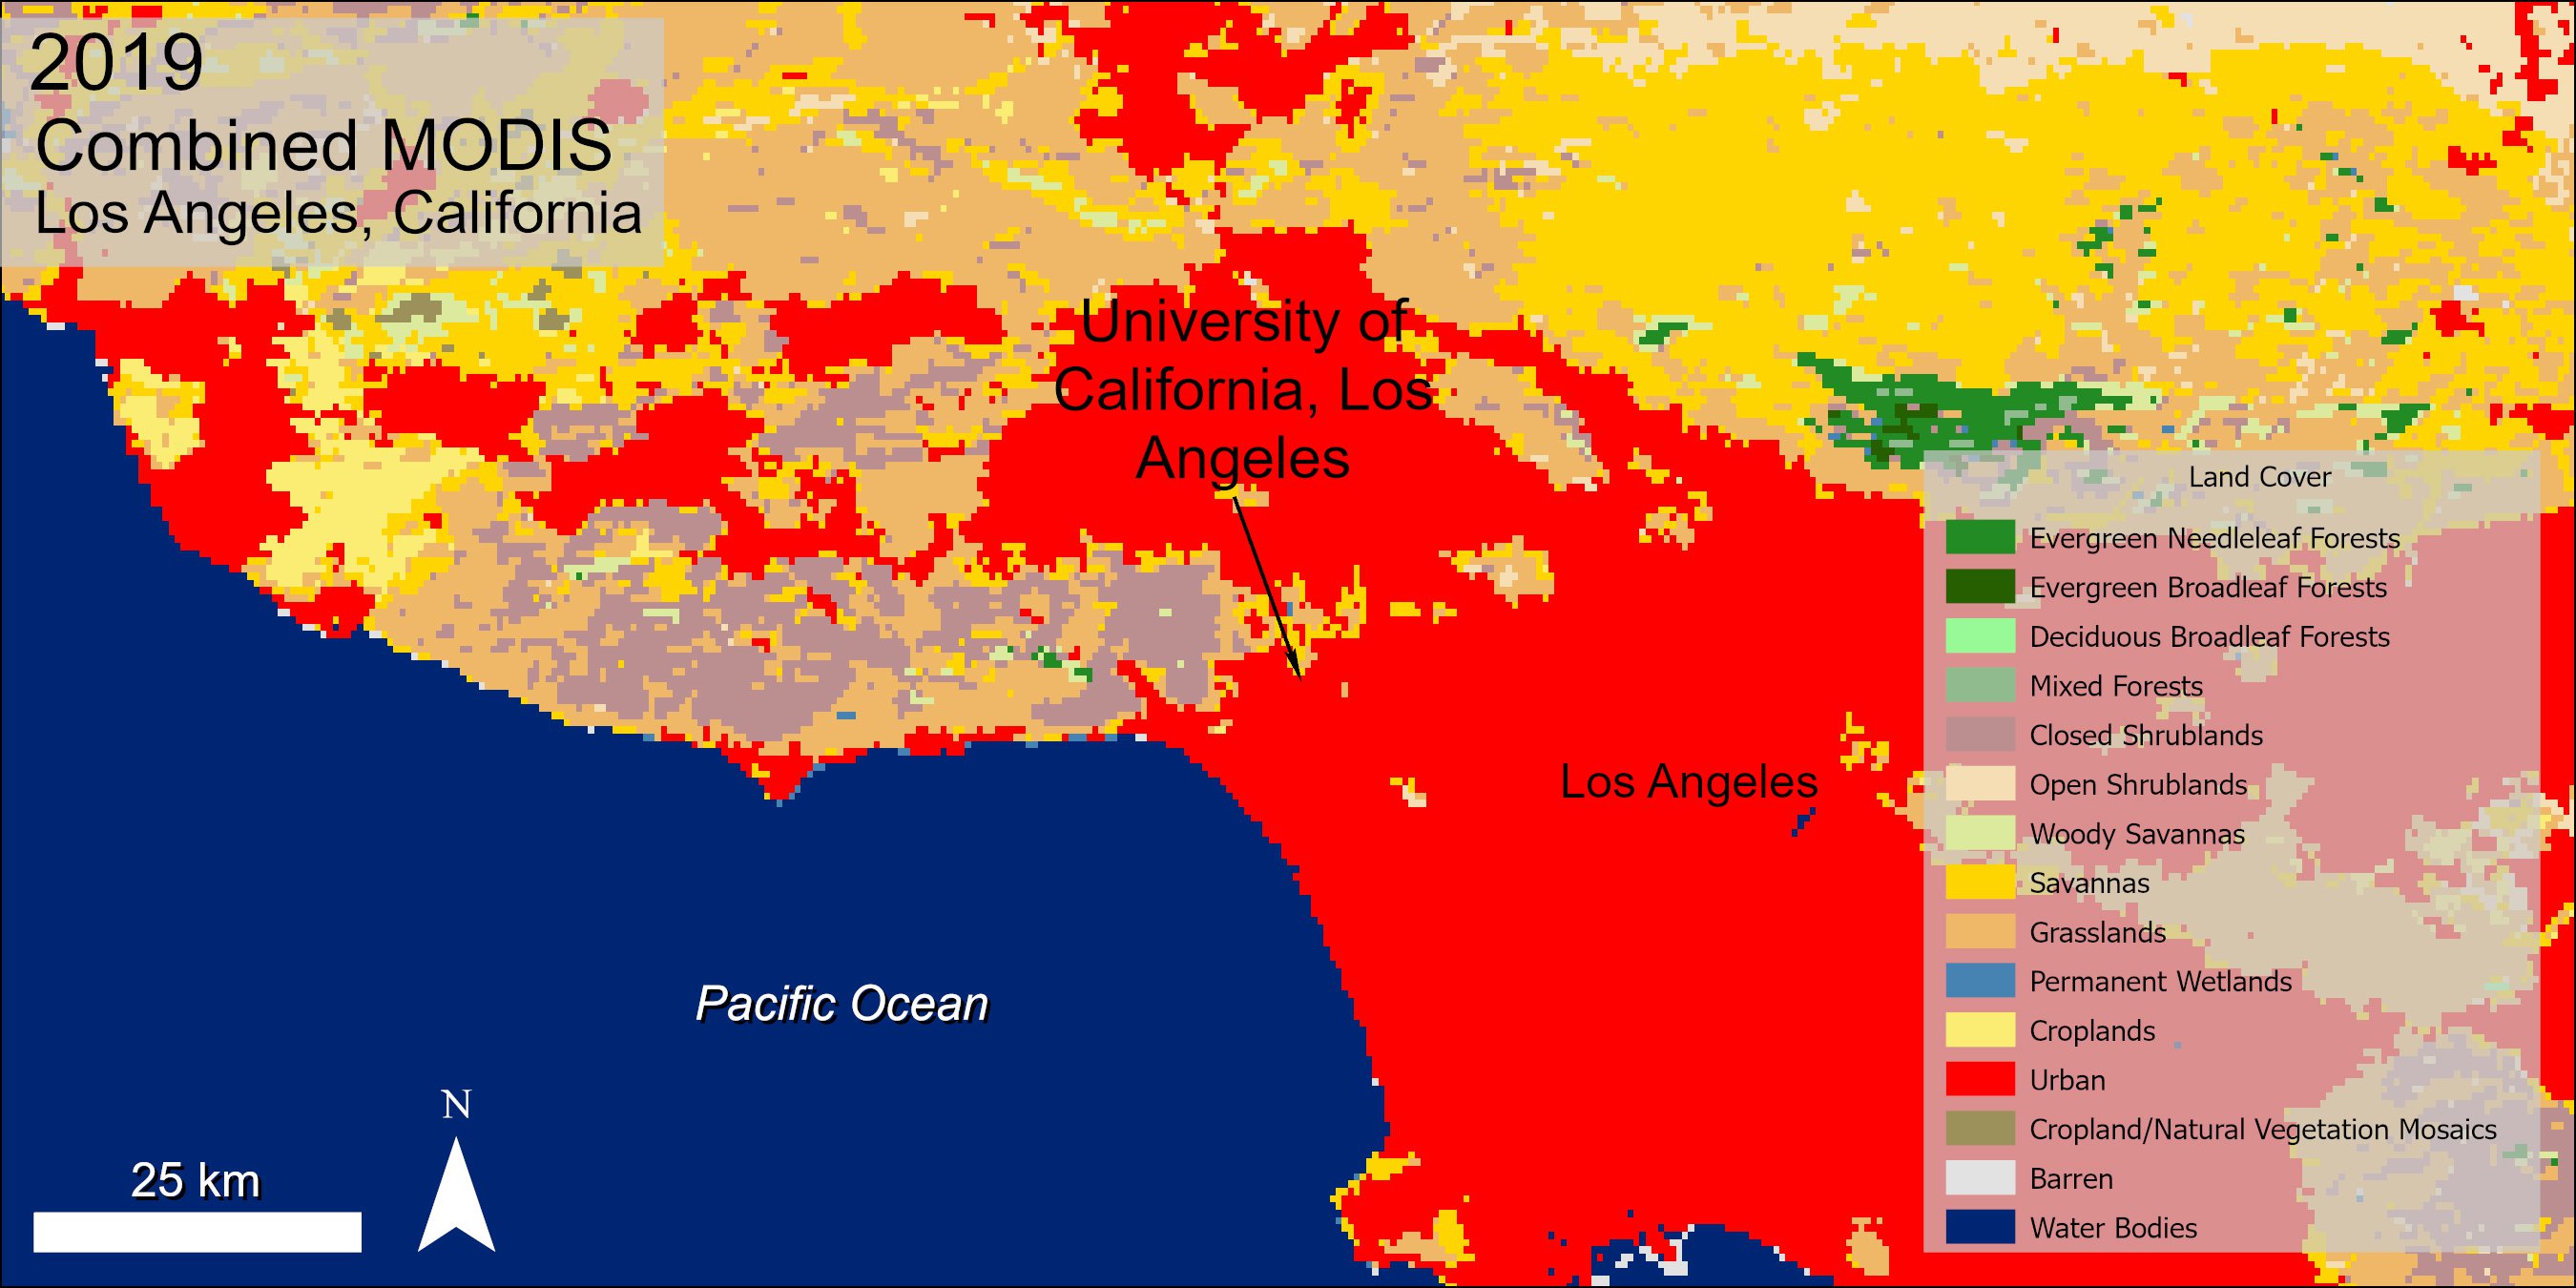 Combined MODIS land cover data over Los Angeles, California.